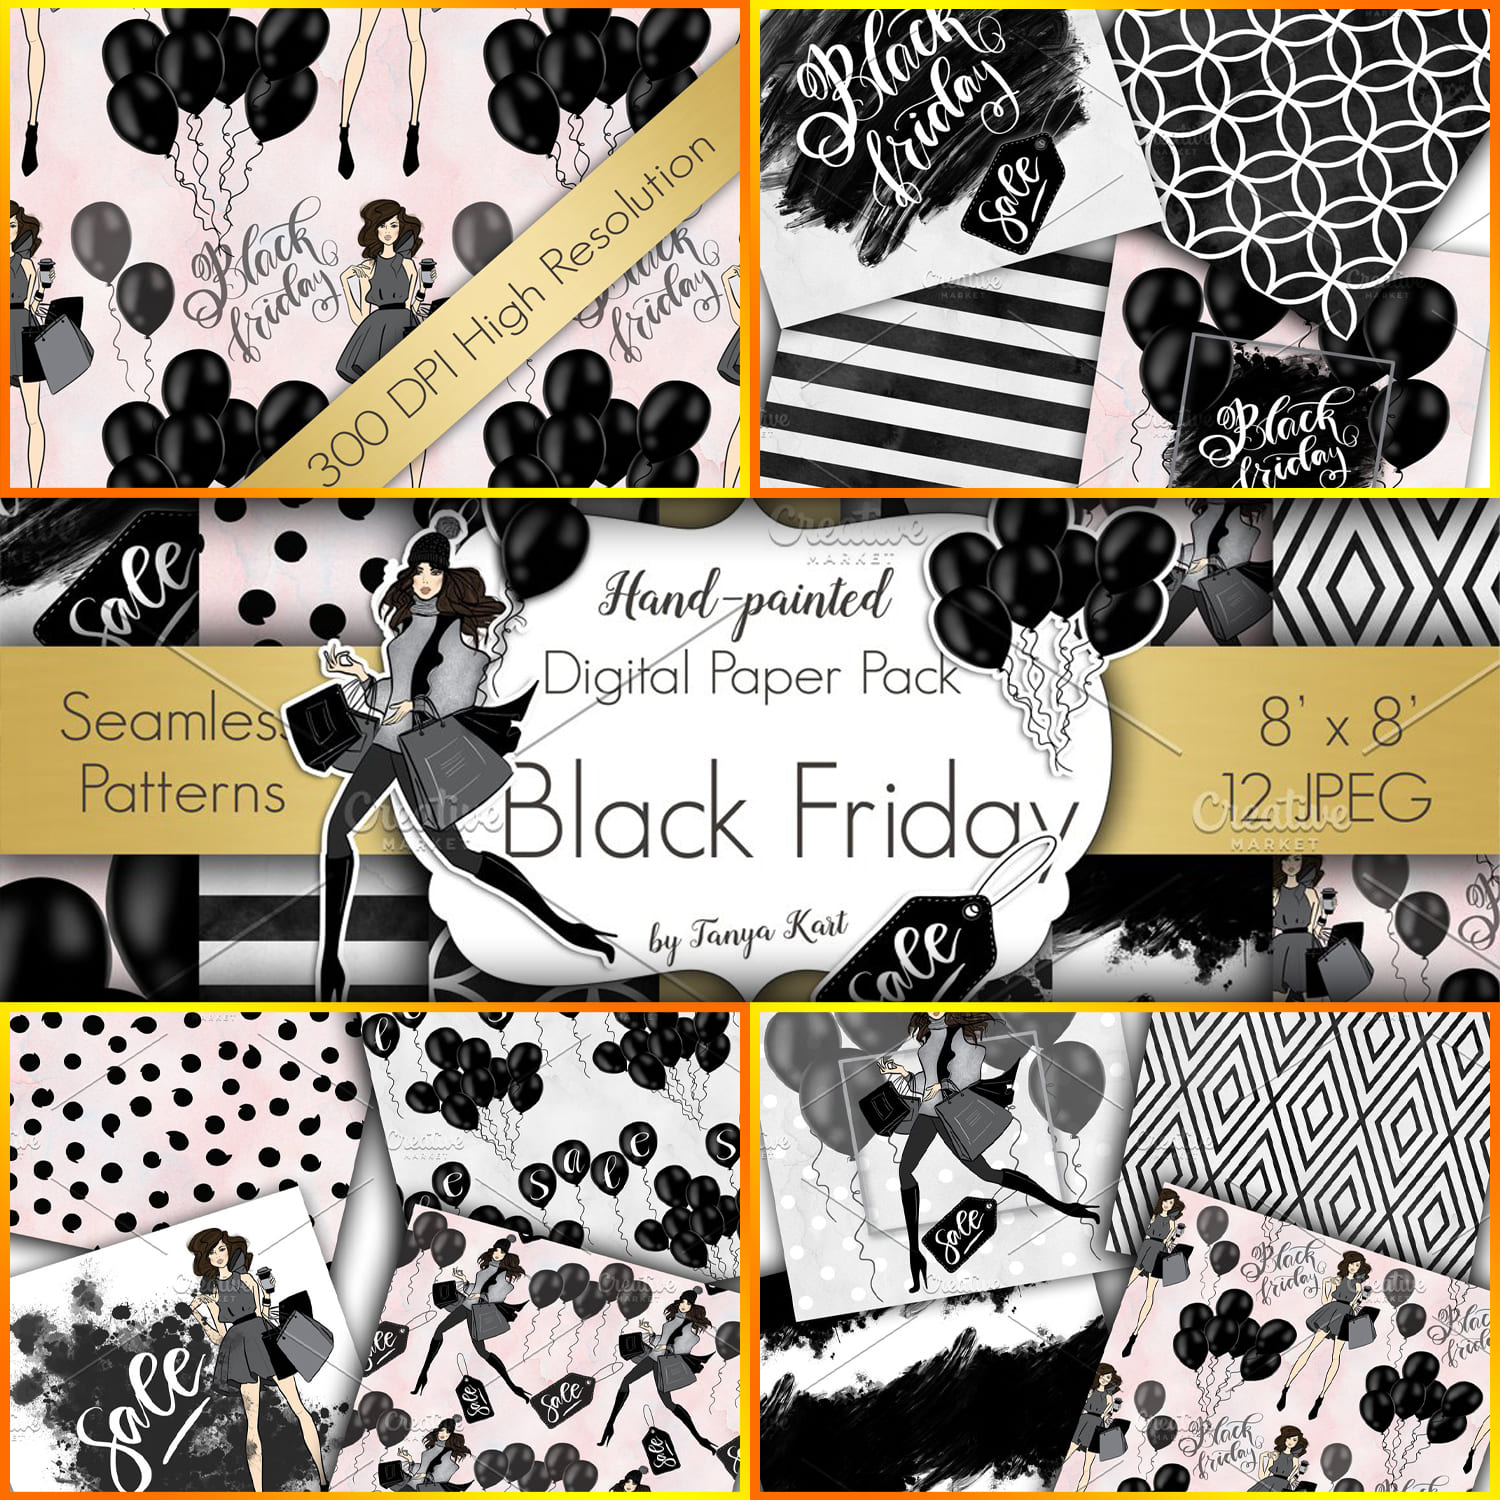 Black Friday Hand Painted Design Kit Cover.